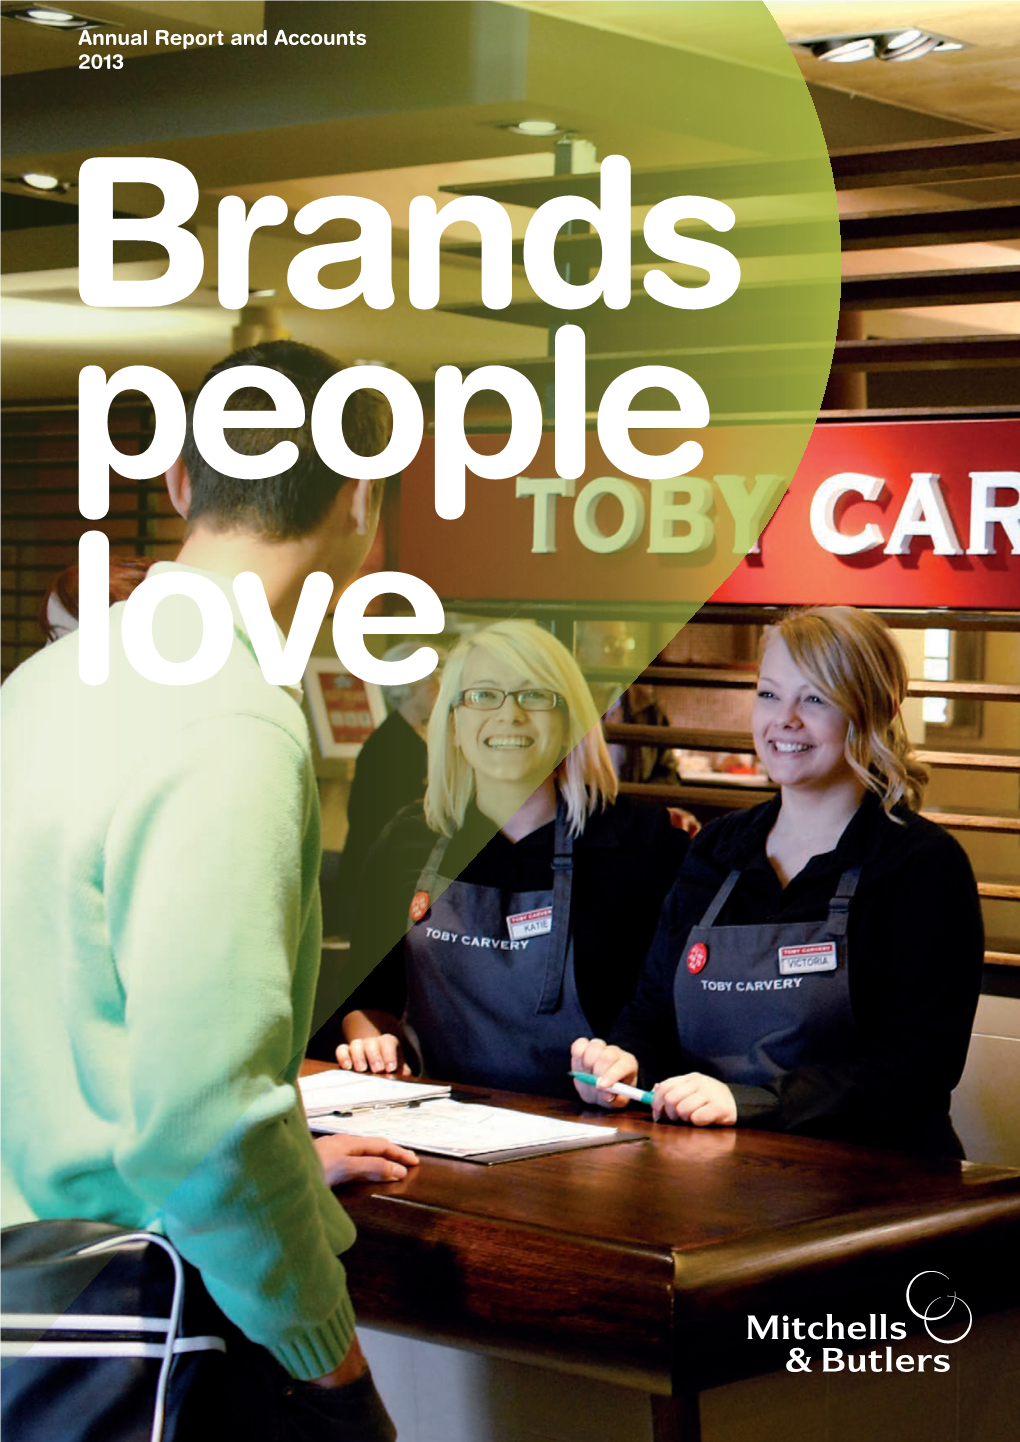 Annual Report and Accounts 2013 Brands People Love Plc & Butlers Mitchells Annual Report and Accounts 2013 Accounts and Report Annual Brands People Love